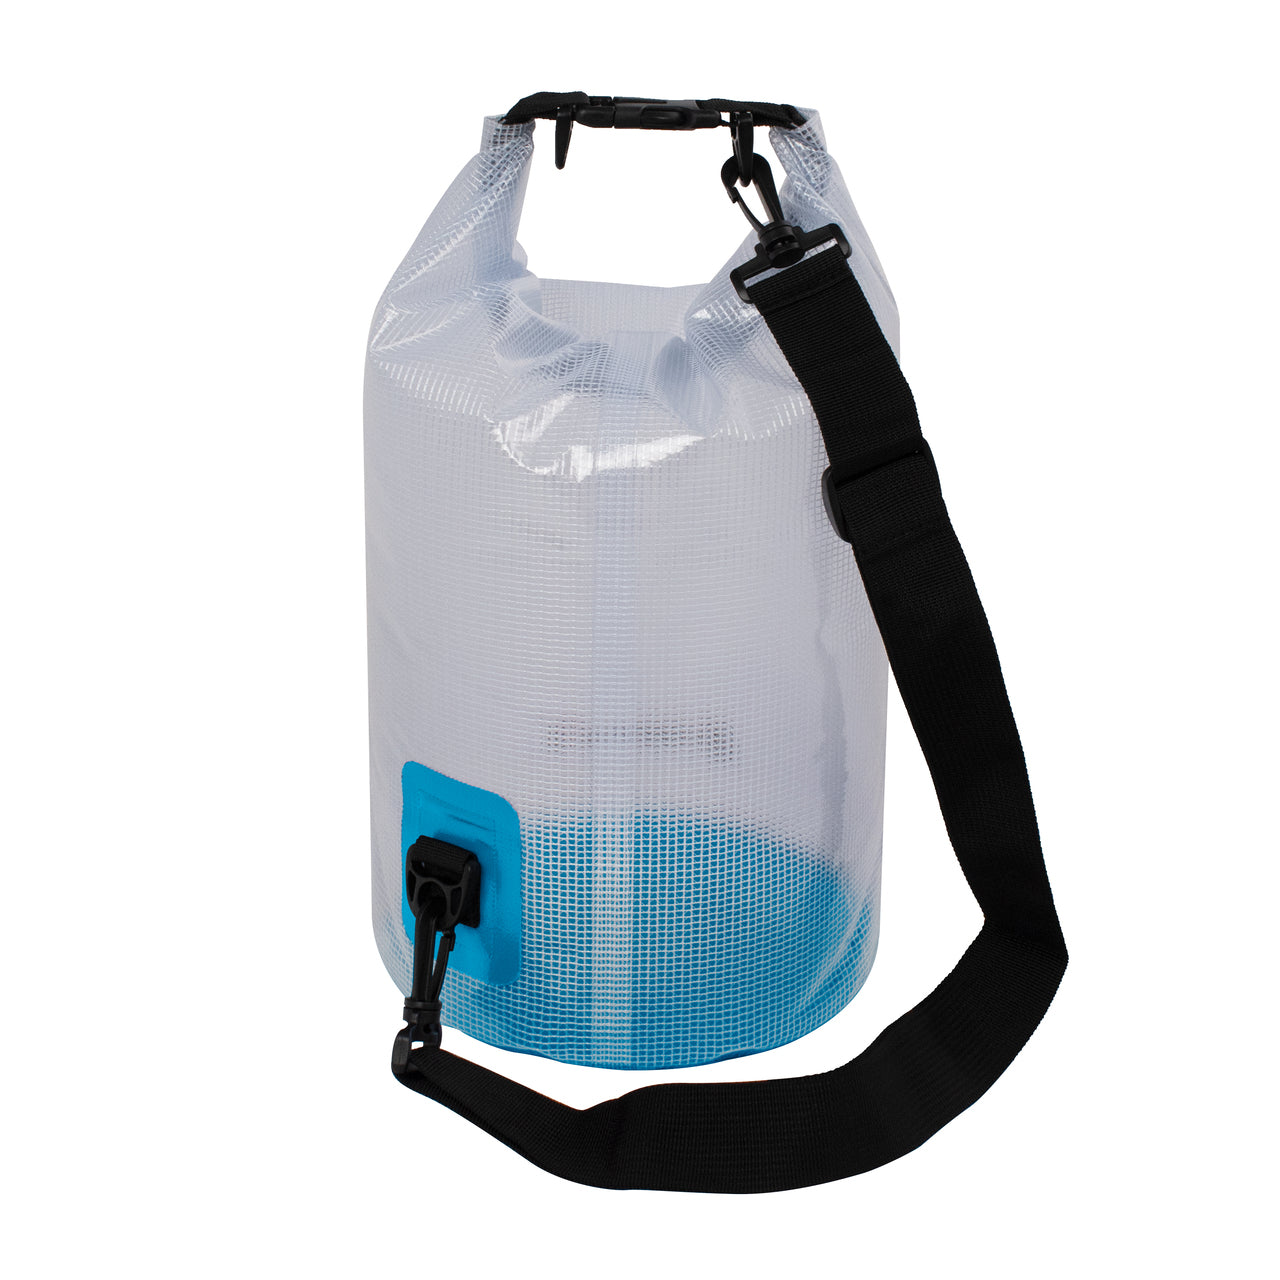 TrailGear 10 liter Heavy-Duty Transparent Dry Bag in the sky blue variation.